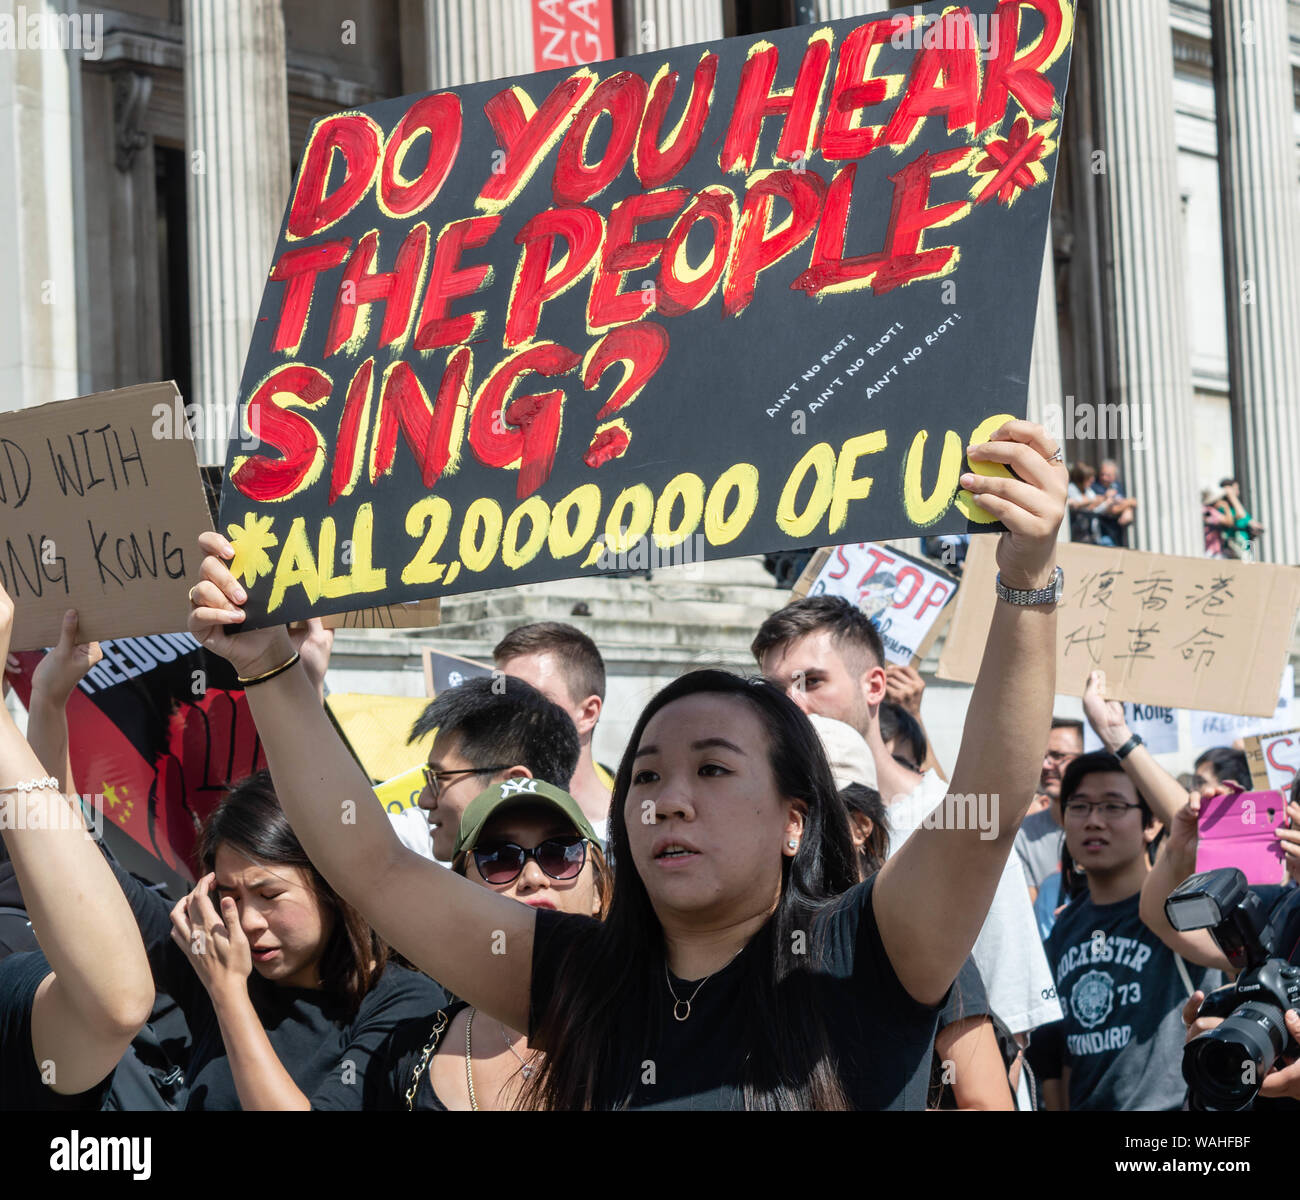 London, United Kingdom - August 17,  2019: Woman holding a banner in support of Hong Kong at the UK Solidarity with Hong Kong Rally. Stock Photo